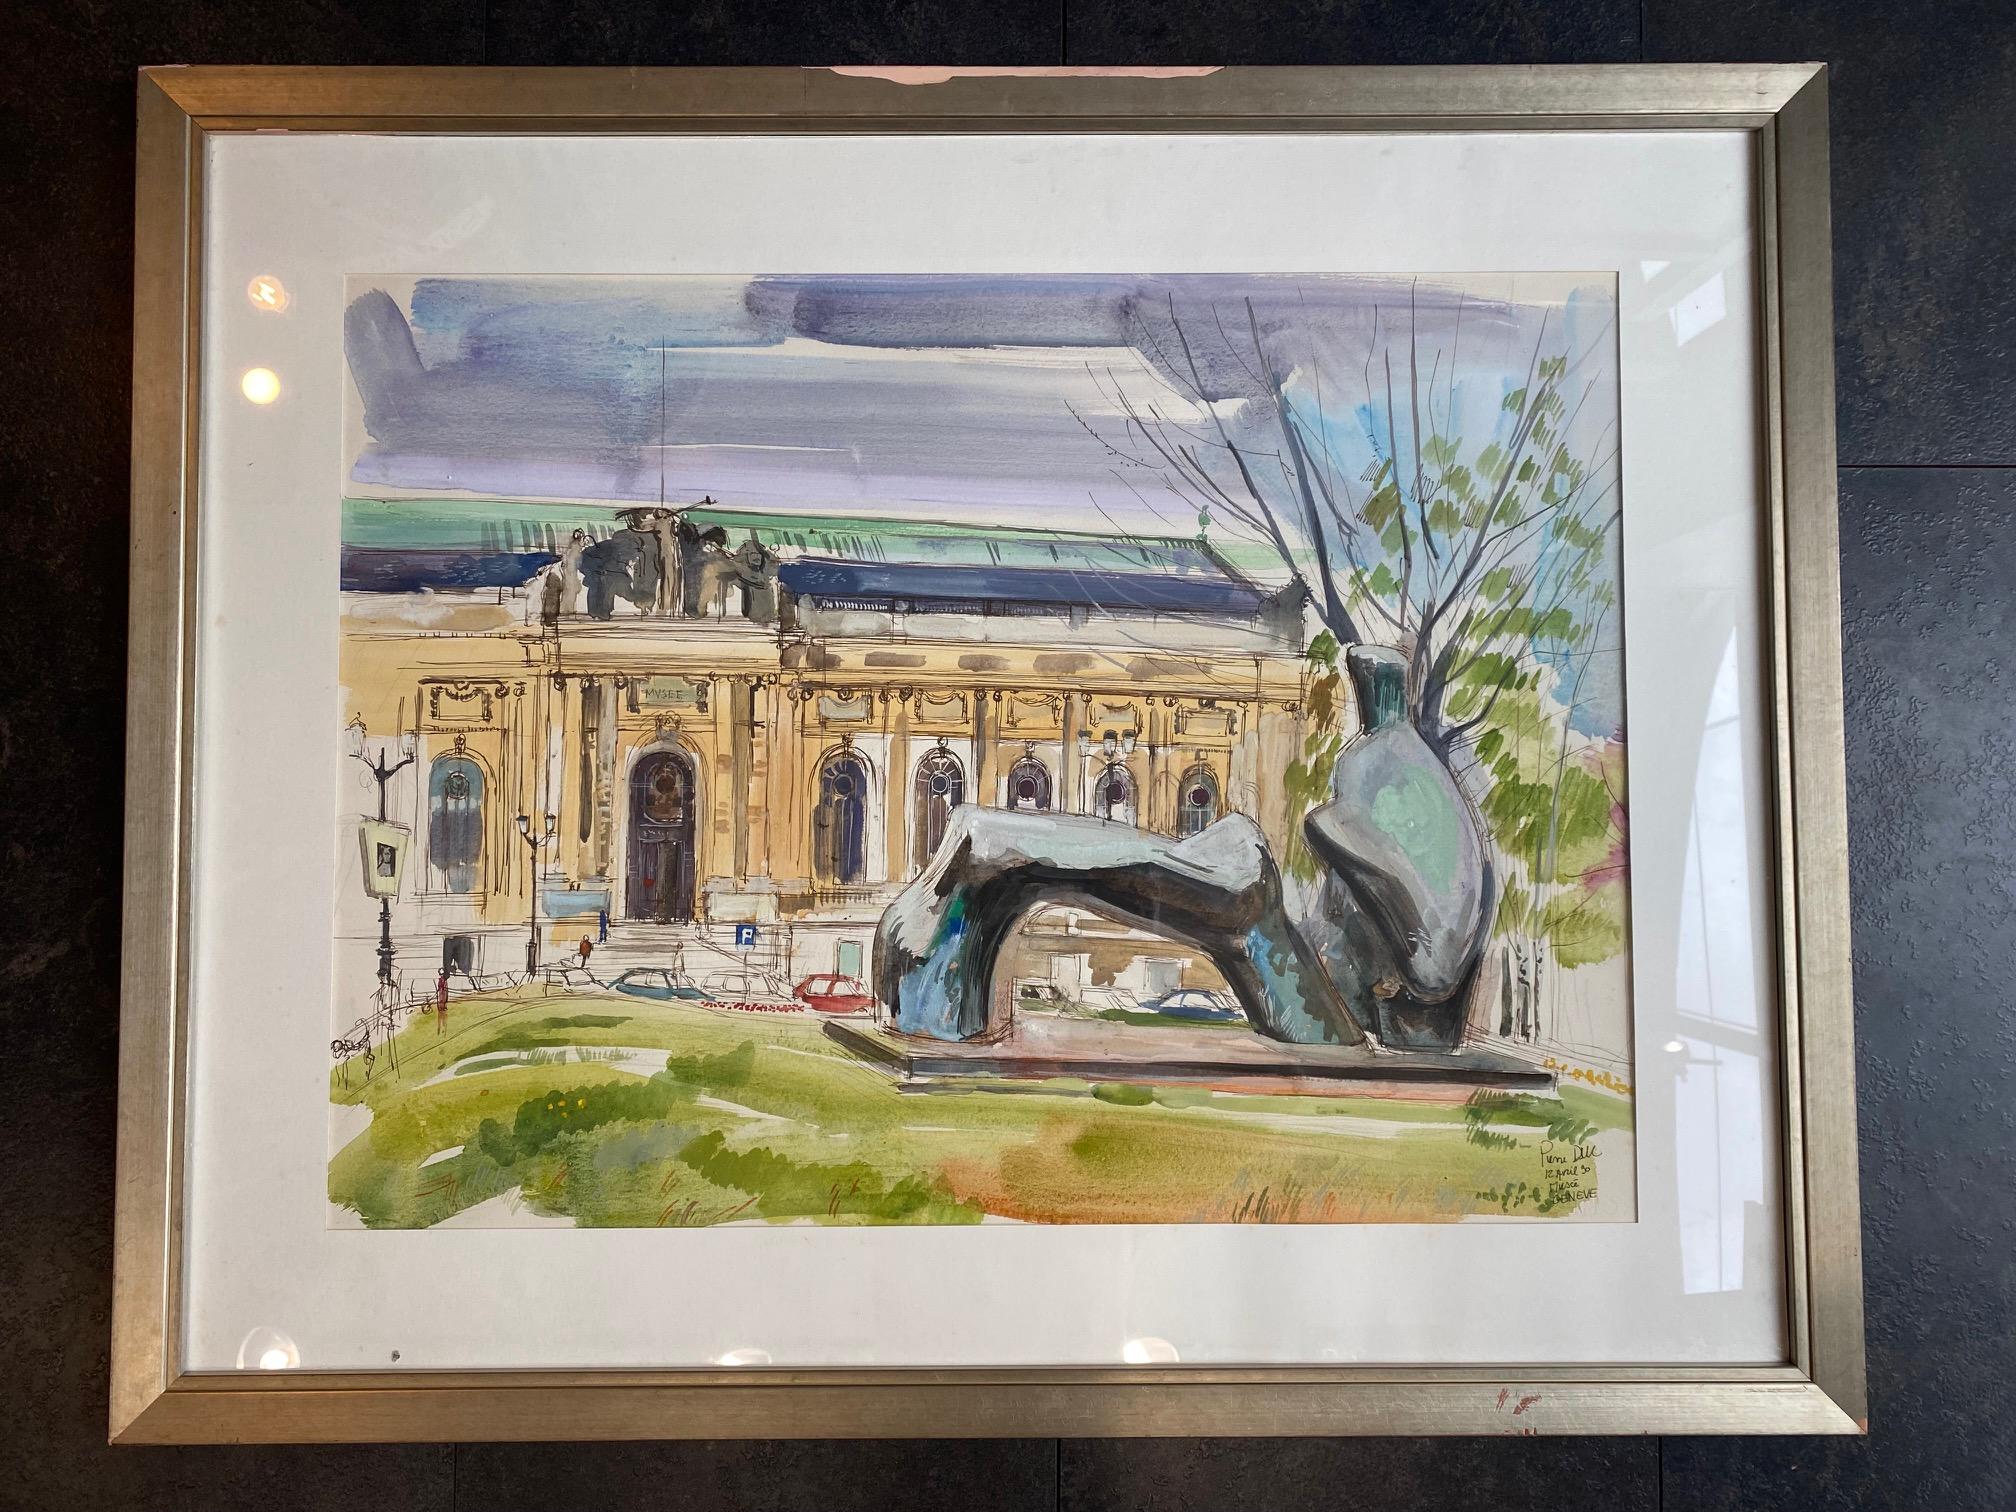 Work on paper. Framed 74x92,5 cm

Pierre Duc (born in 1945) is a French painter, engraver and sculptor.
A former student of the sculptor Georges Oudot (who created, among other things, the academician swords of Edgar Faure and Jacques Soustelle),